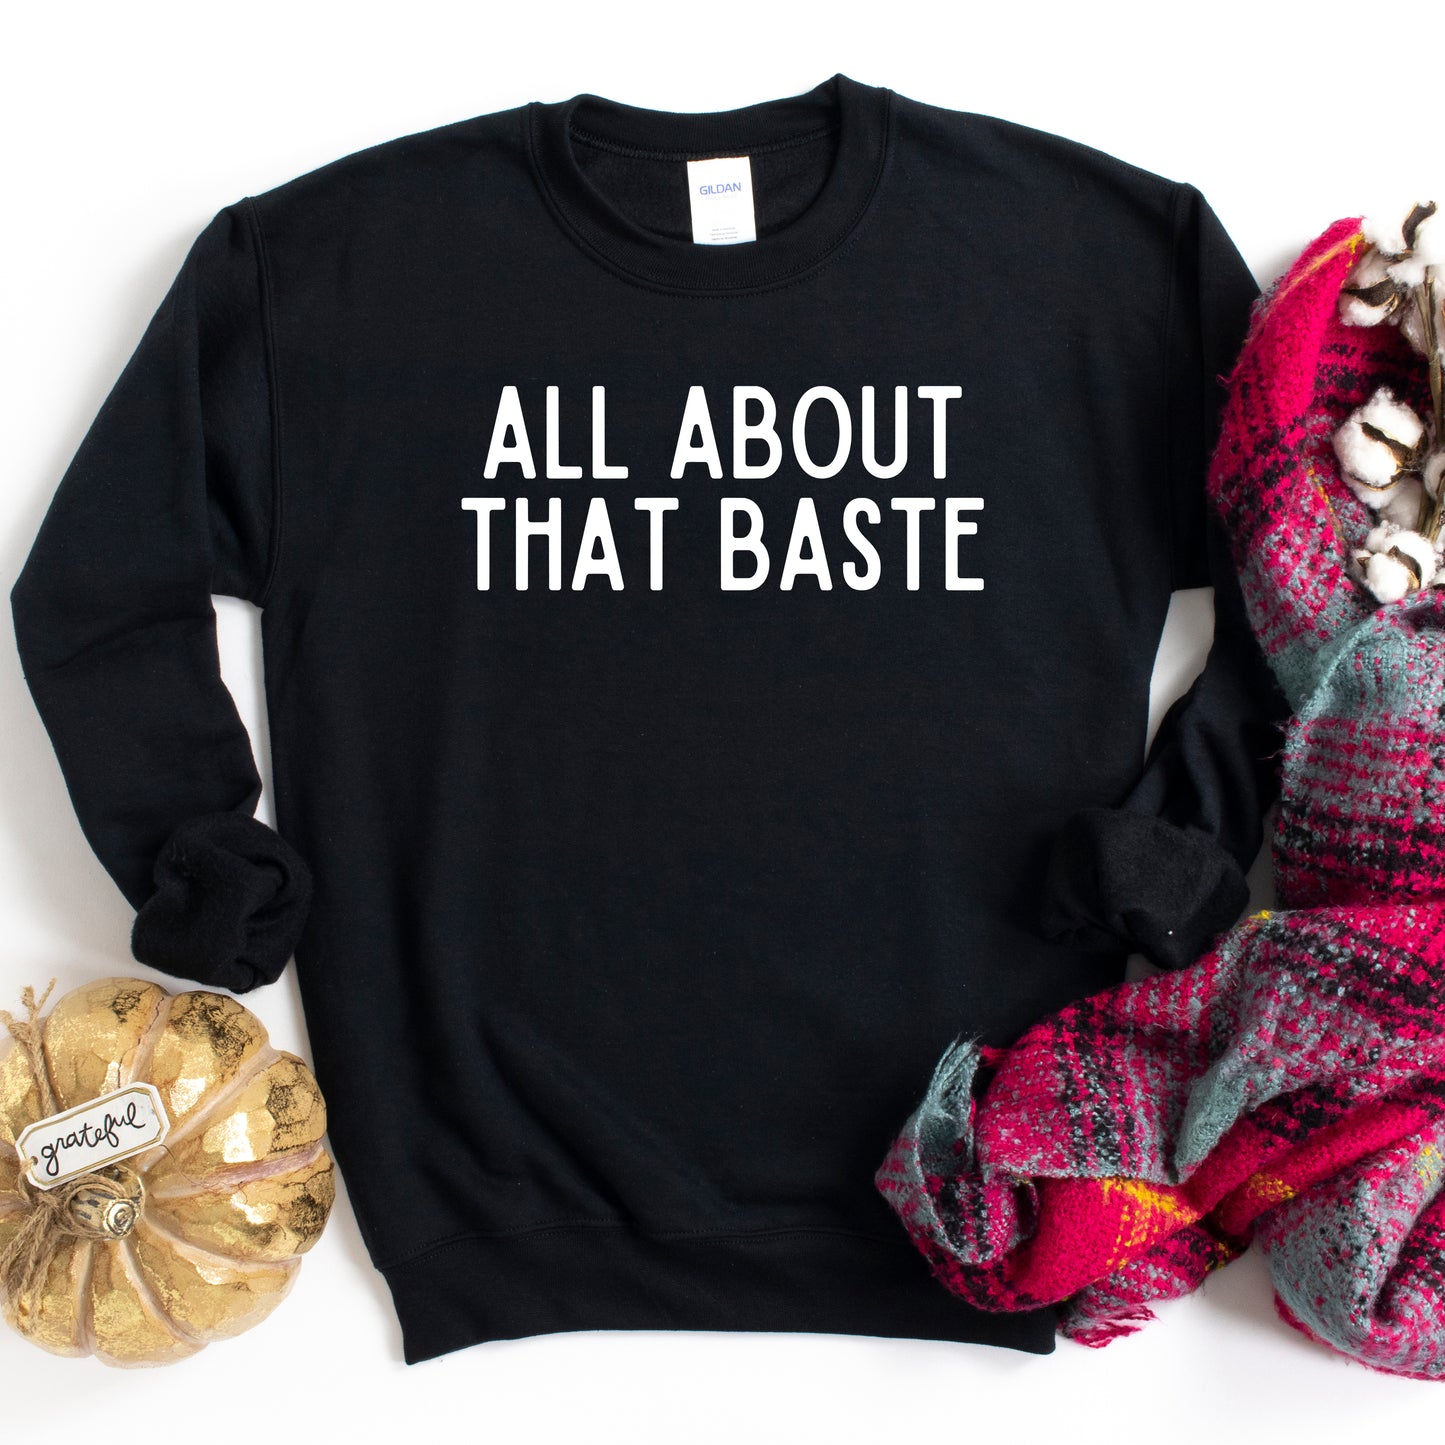 All About That Bate | Sweatshirt